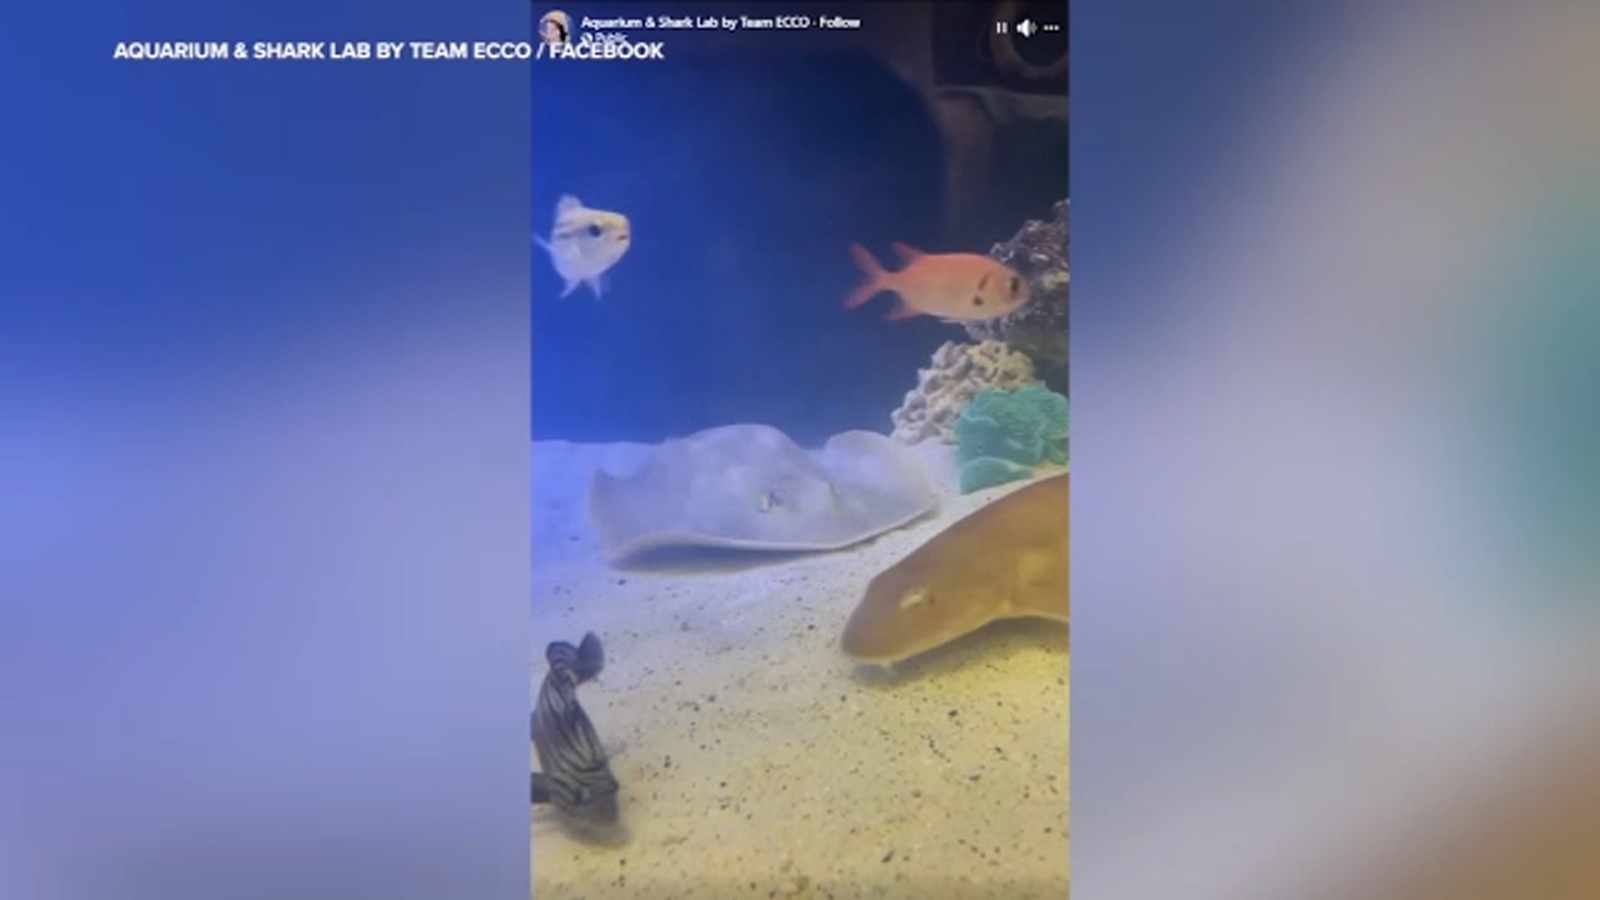 Charlotte the stingray dies after developing rare reproductive disease, aquarium says [Video]